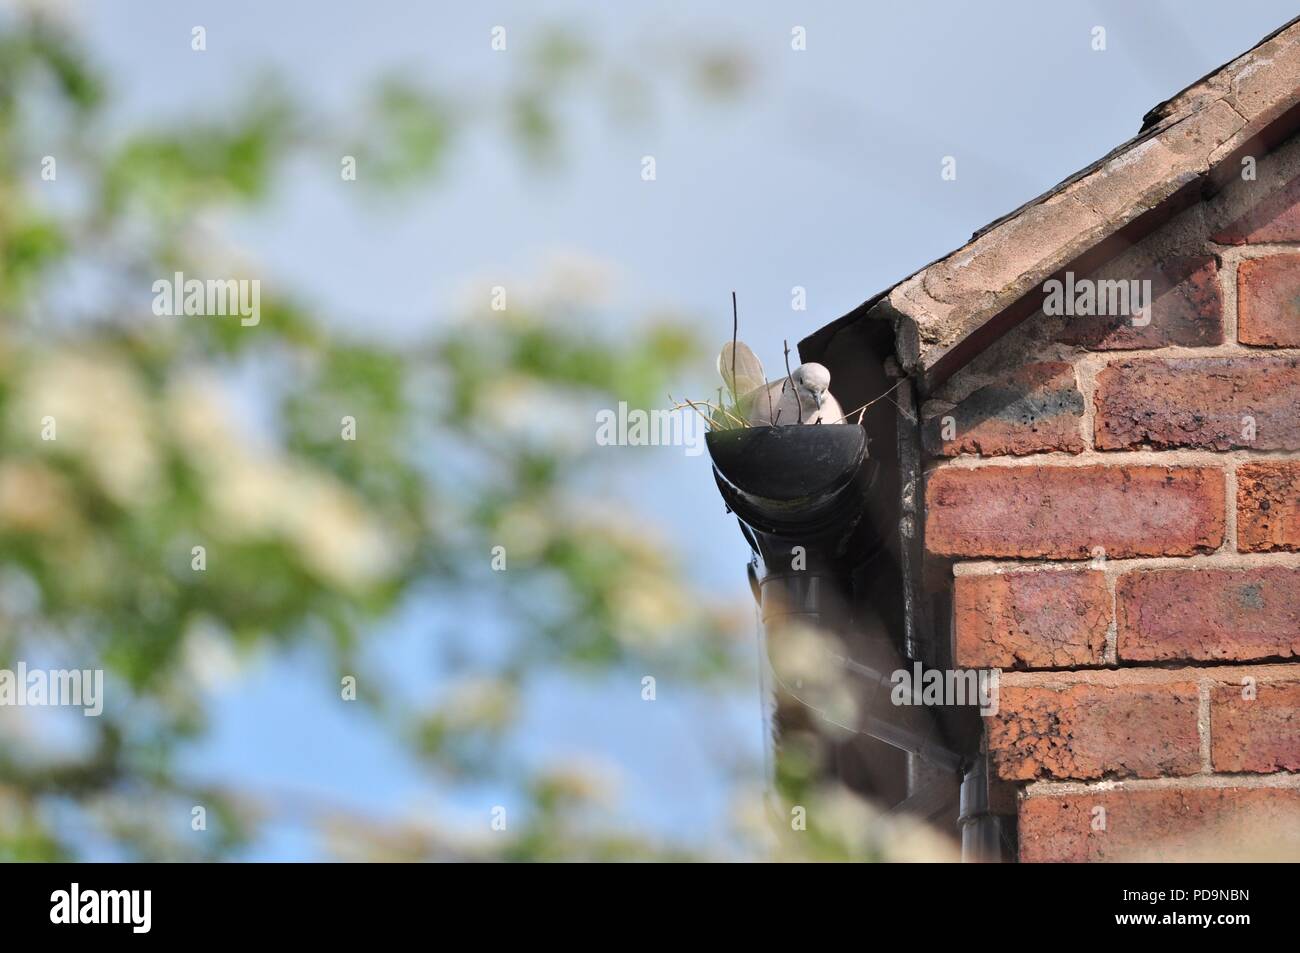 Eurasian collared dove nesting in a drainage pipe on a house (Bird nesting in gutter) (Streptopelia decaocto) Stock Photo